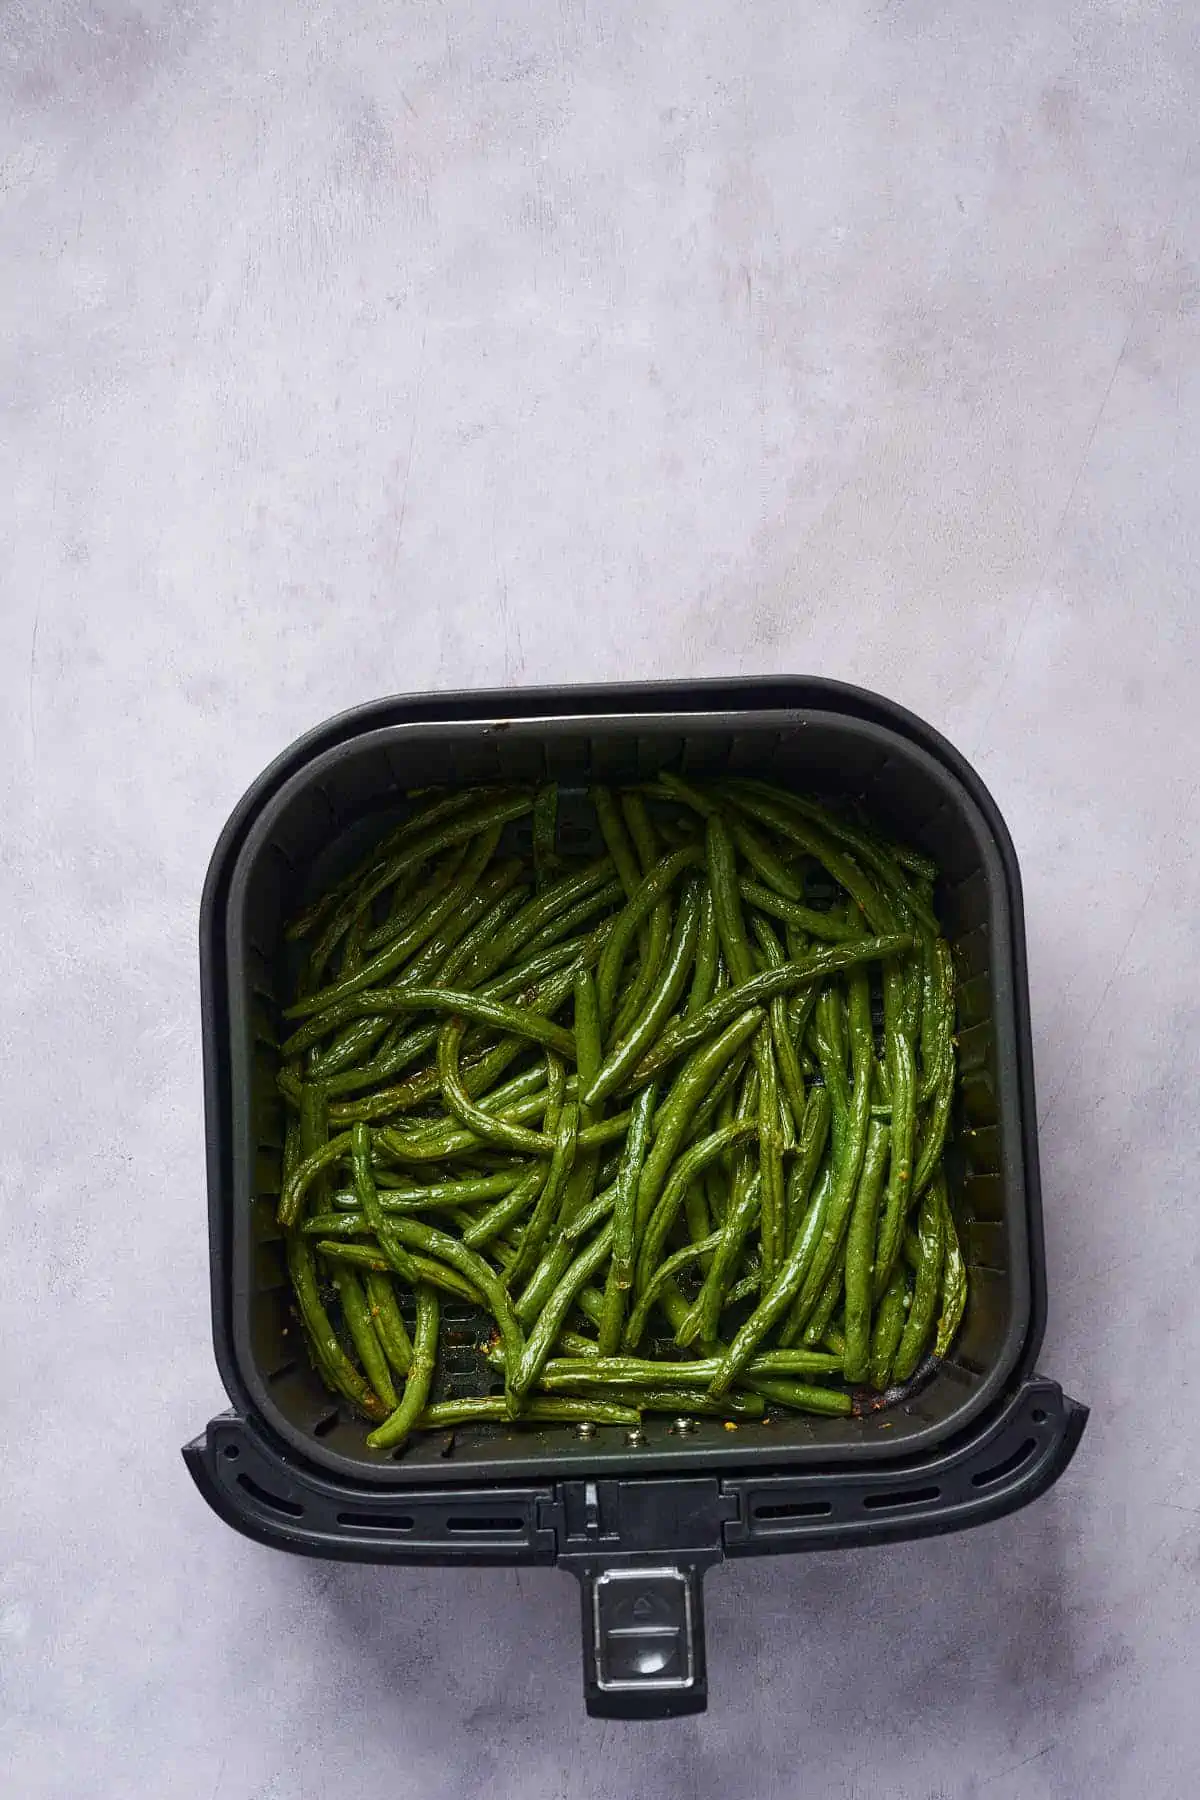 Cooked garlic green beans in the air fryer basket.